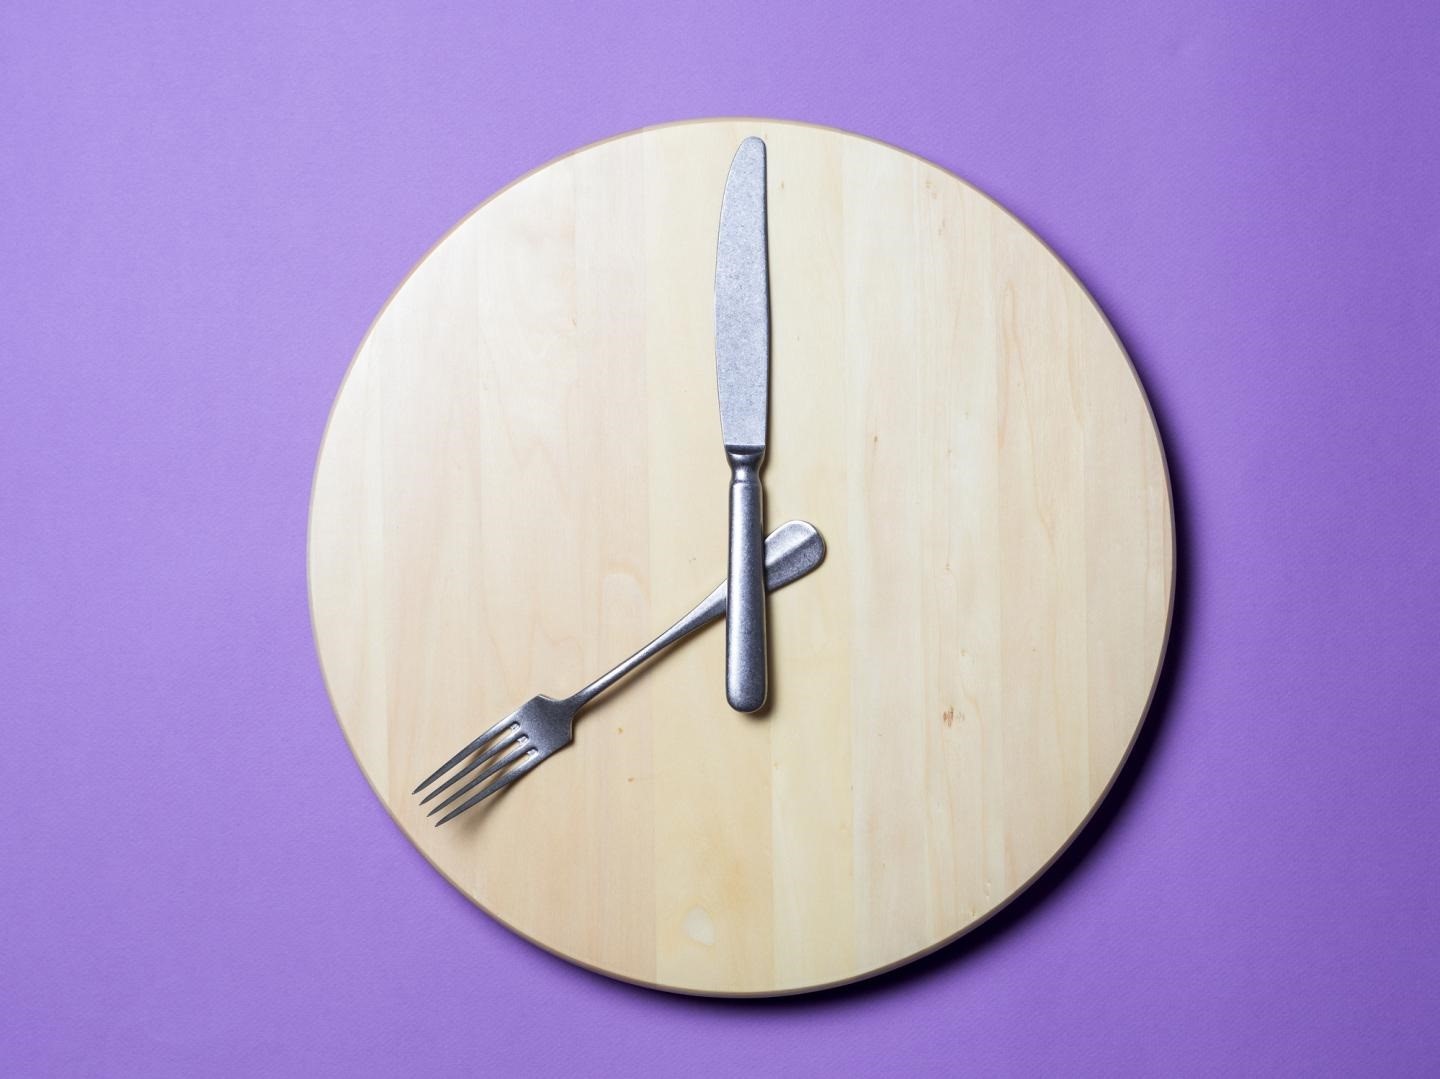 Intermittent fasting is contraindicated for patients who are underweight, women who are breastfeeding or pregnant, patients with eating disorders or diabetics who require insulin (Europa Press)